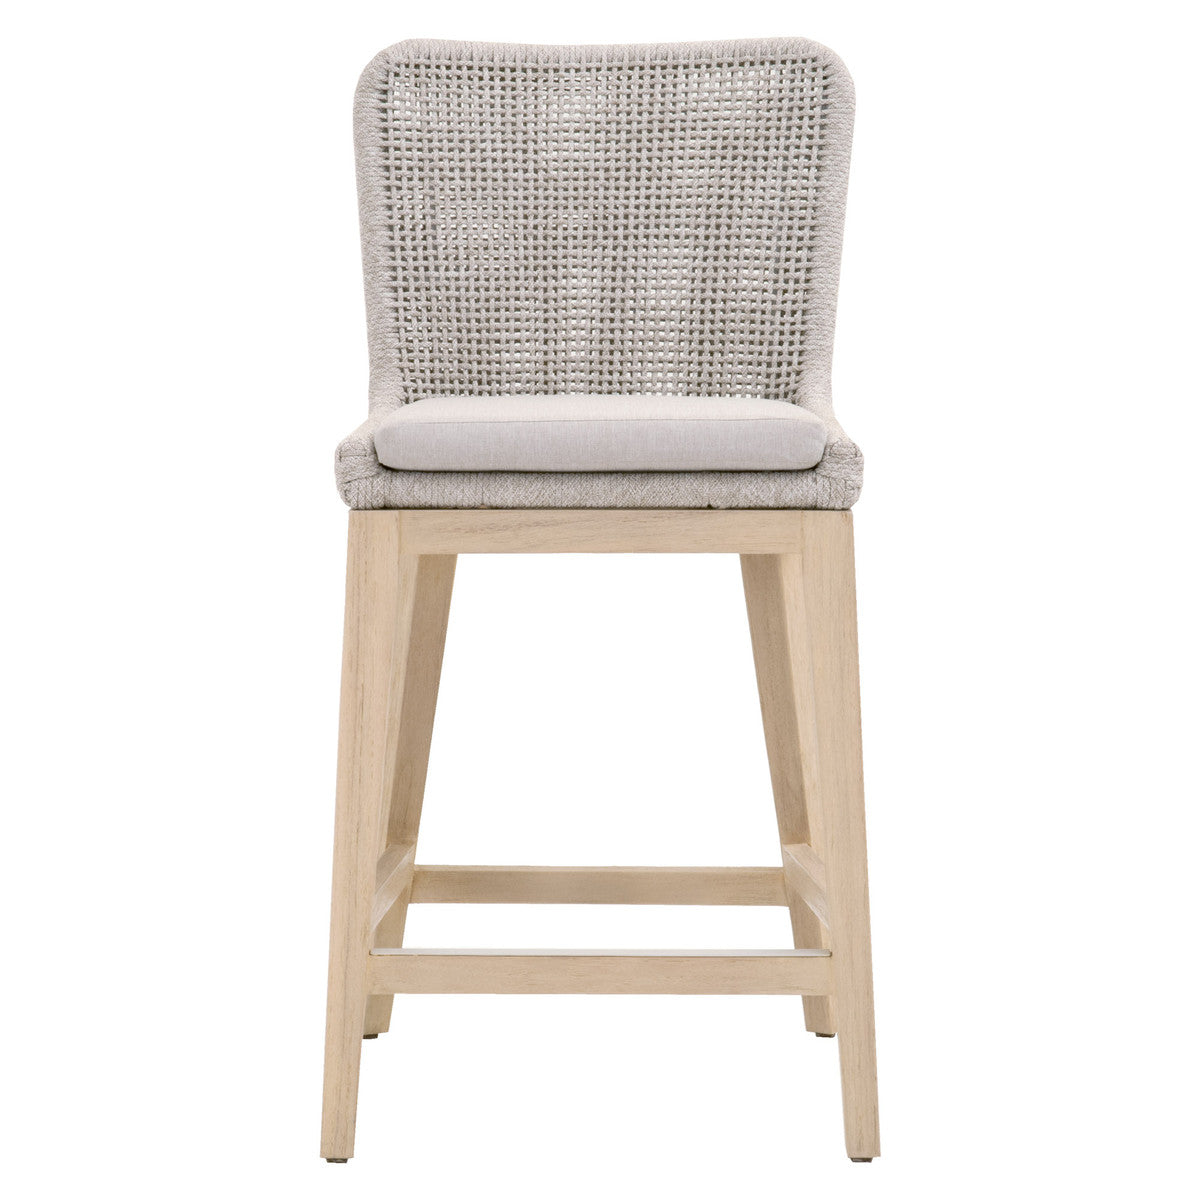 Mesh Outdoor Counter Stool in Taupe & White Flat Rope, Gray Teak, Pumice